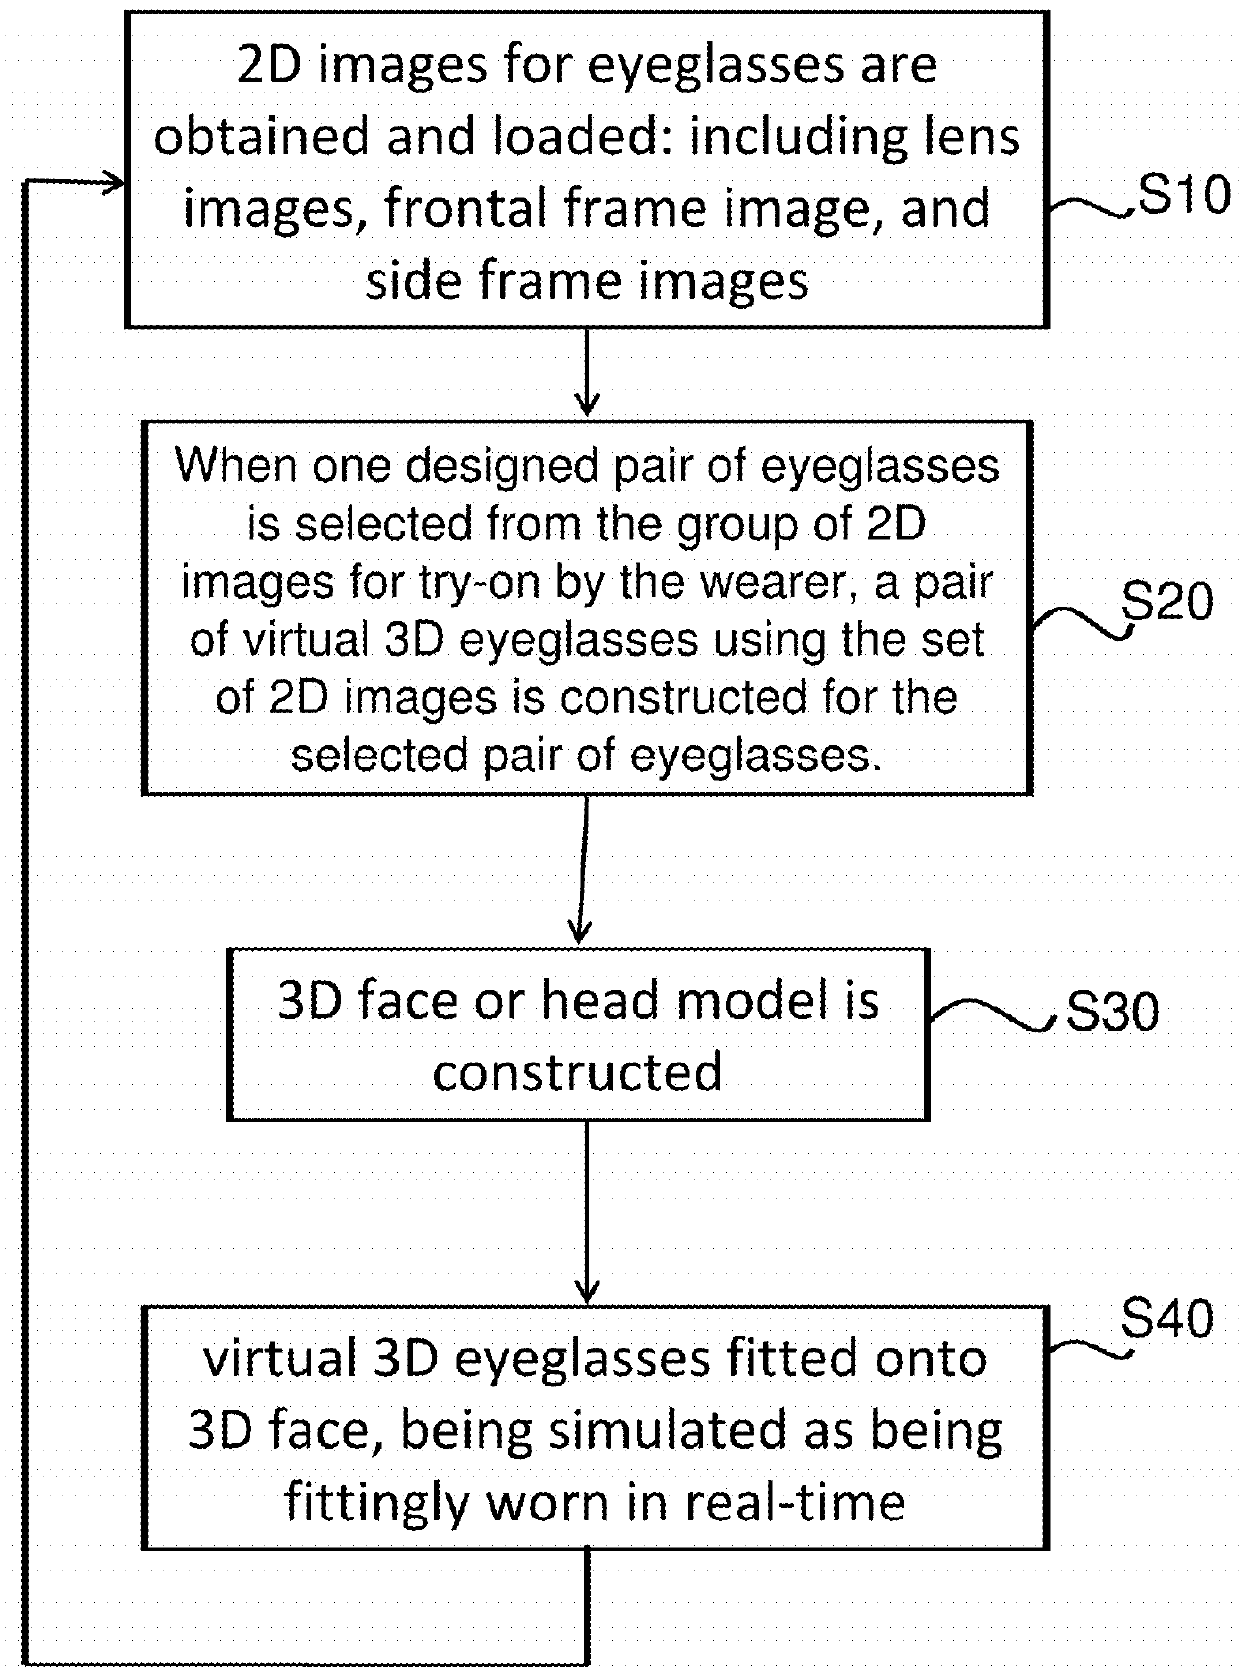 2d image-based 3D glasses virtual try-on system